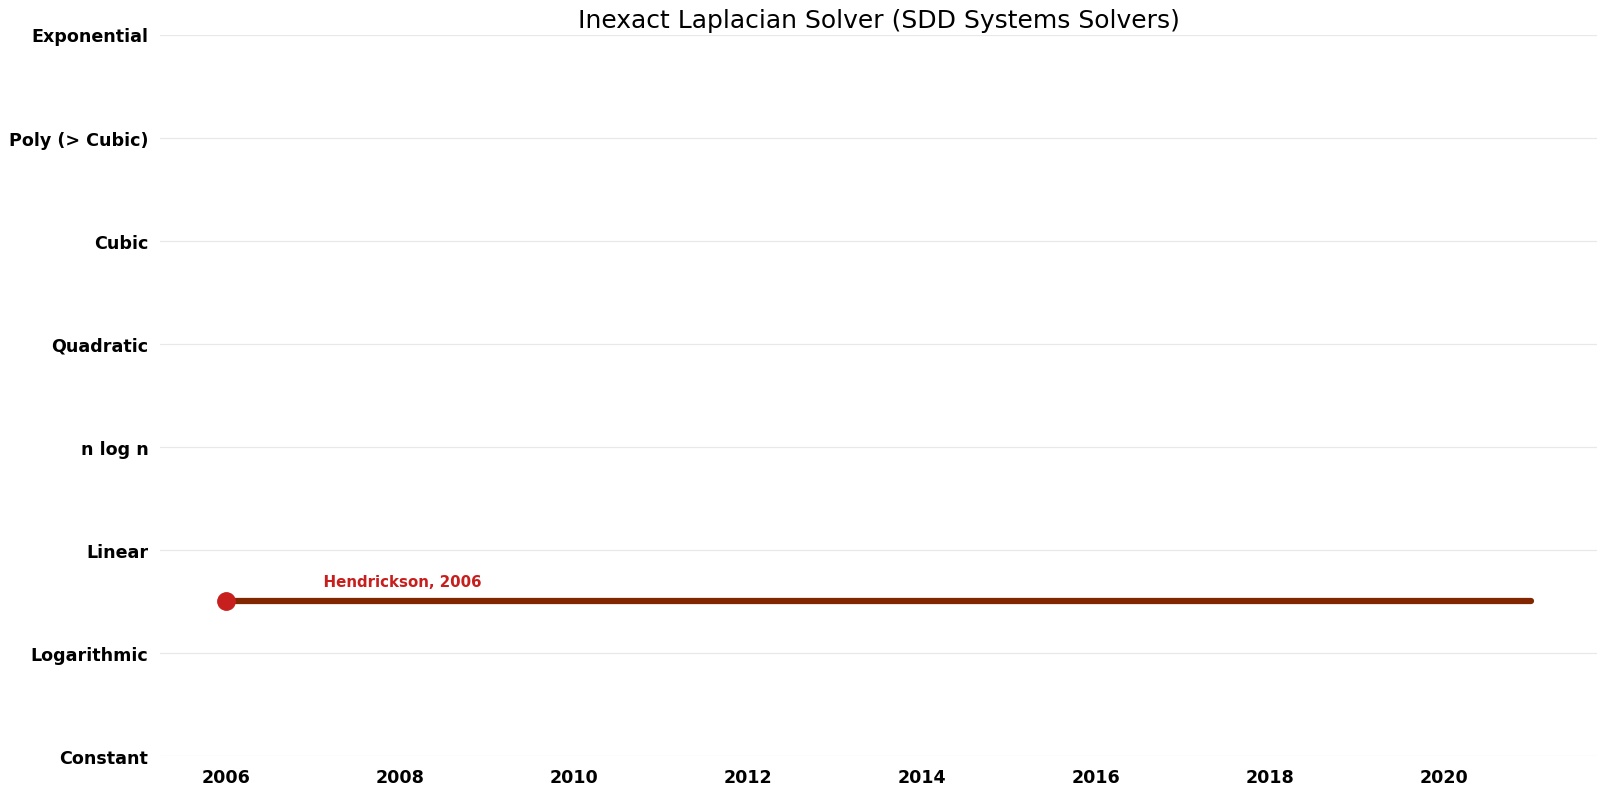 SDD Systems Solvers - Inexact Laplacian Solver - Time.png